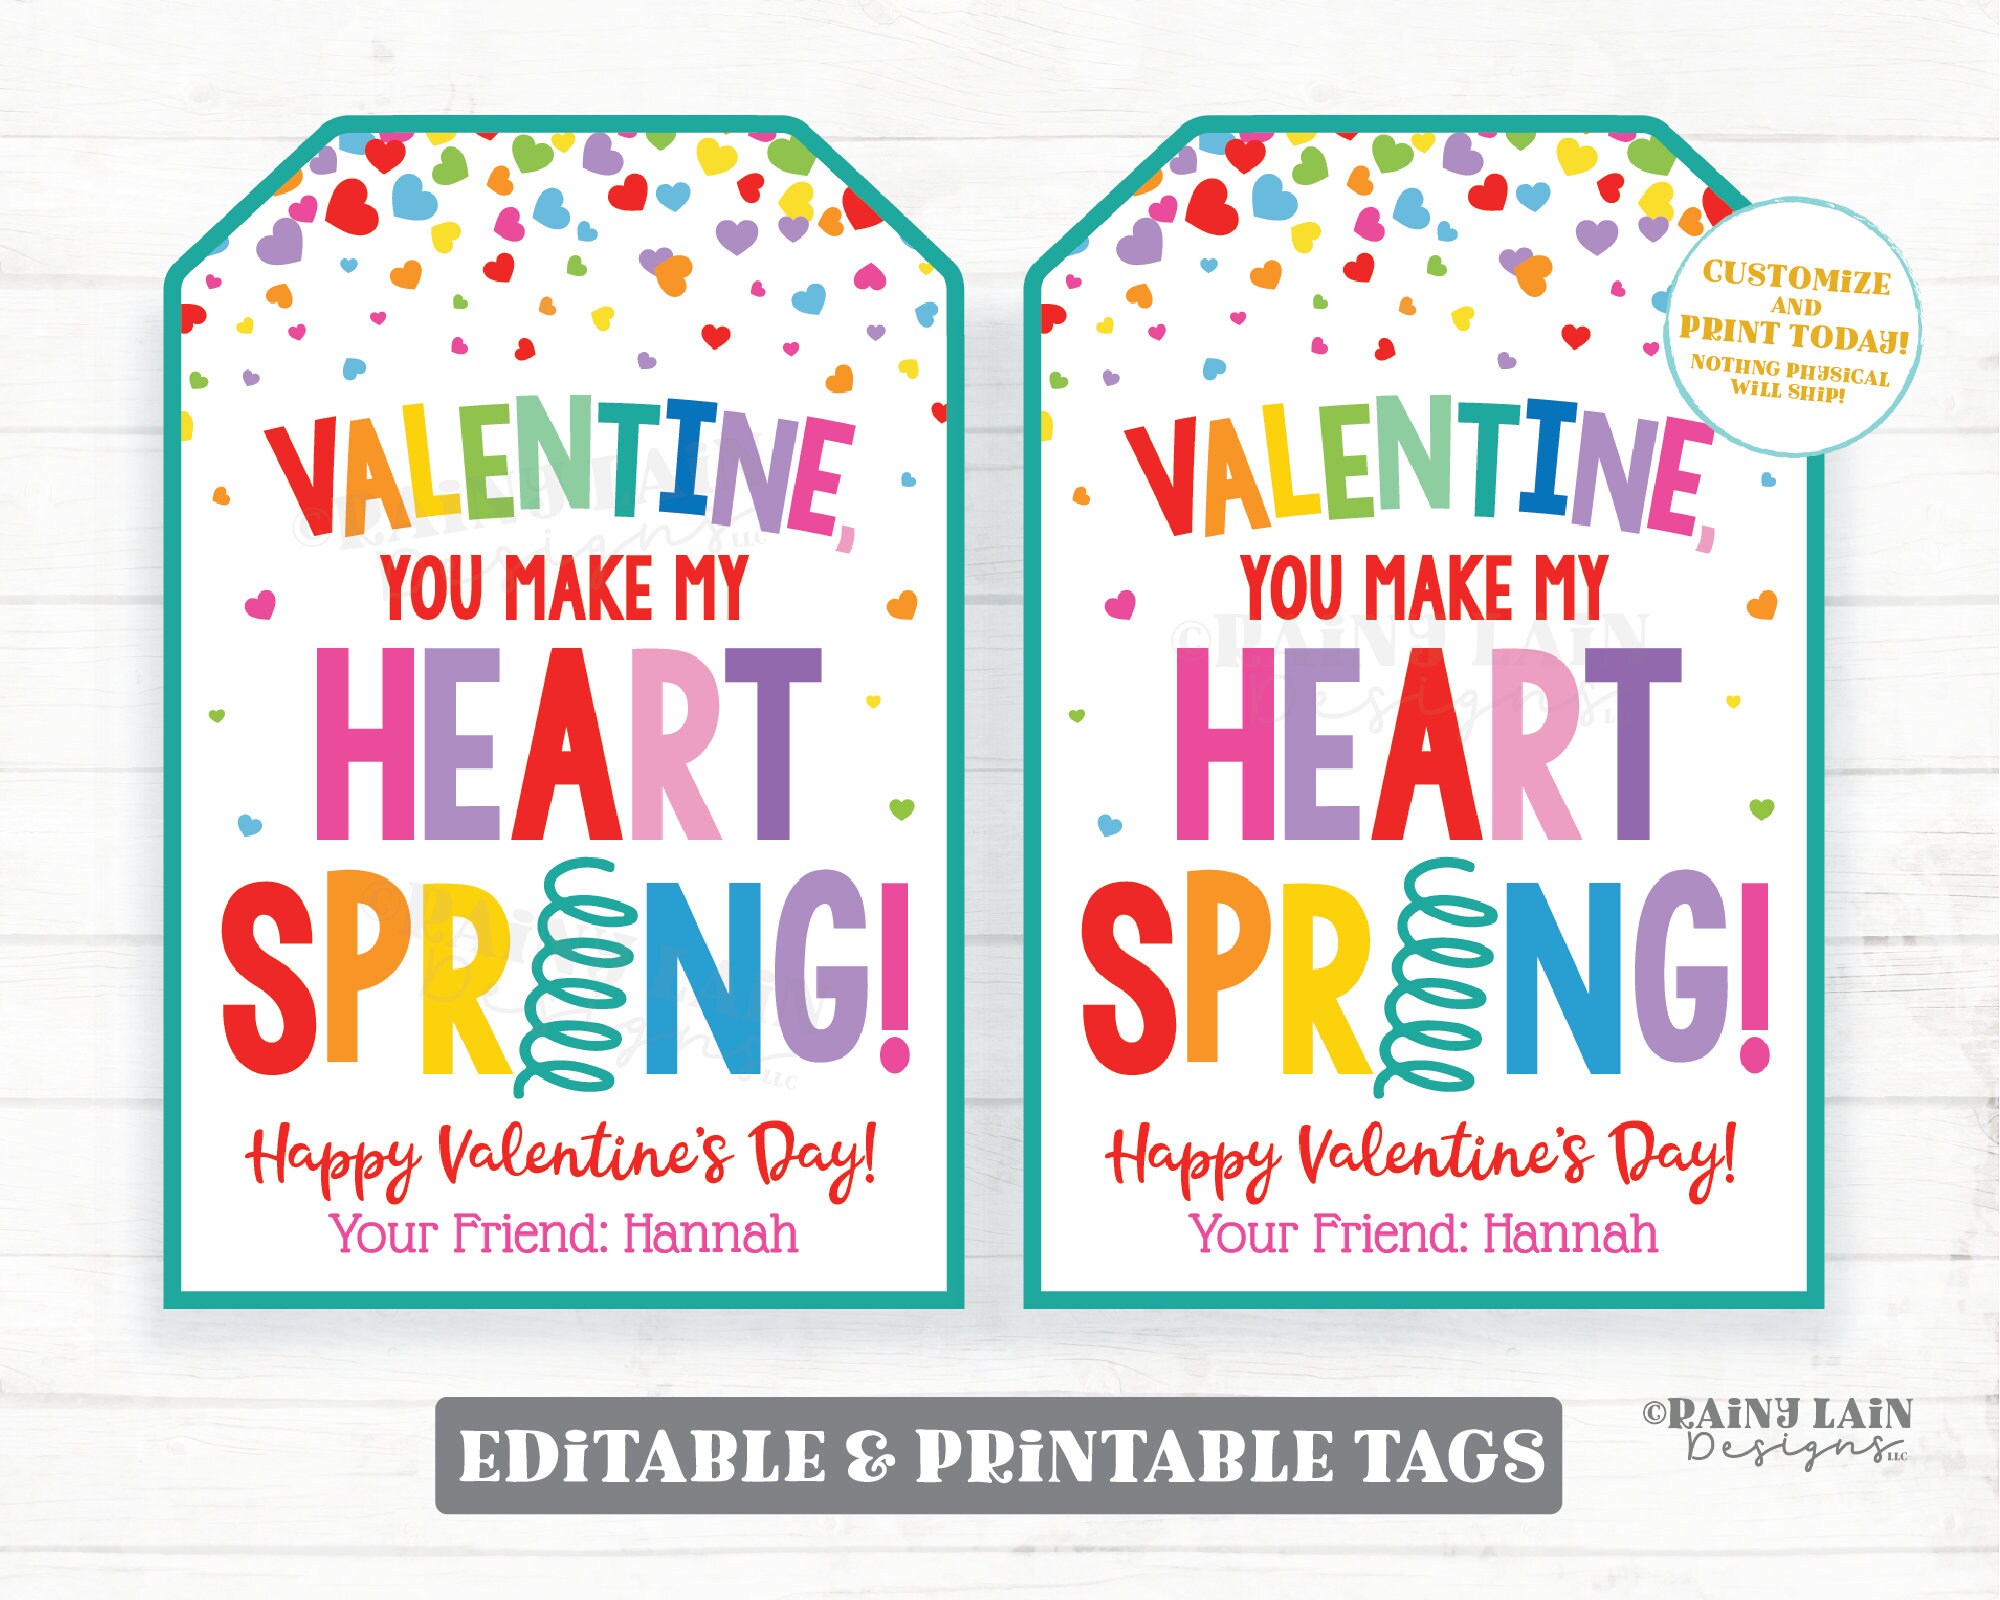 Download Adorable Colorful Coil Heart Aesthetic Valentine's Day